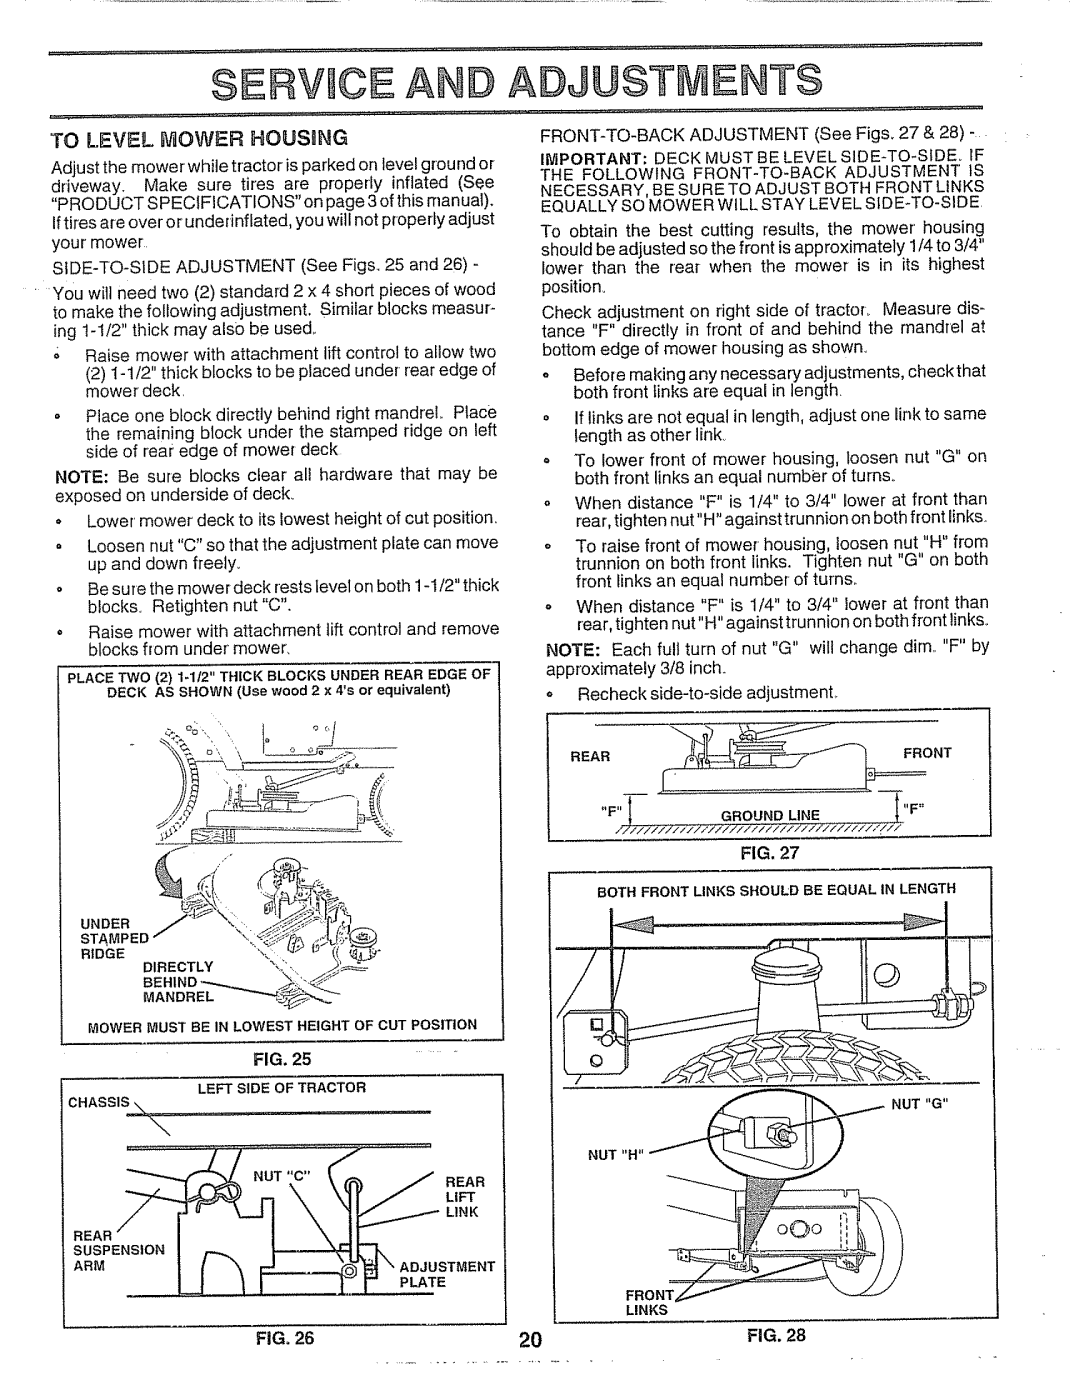 Craftsman 917.25693 owner manual Service And Adjustments, To Level Mower Housbng, Fig 